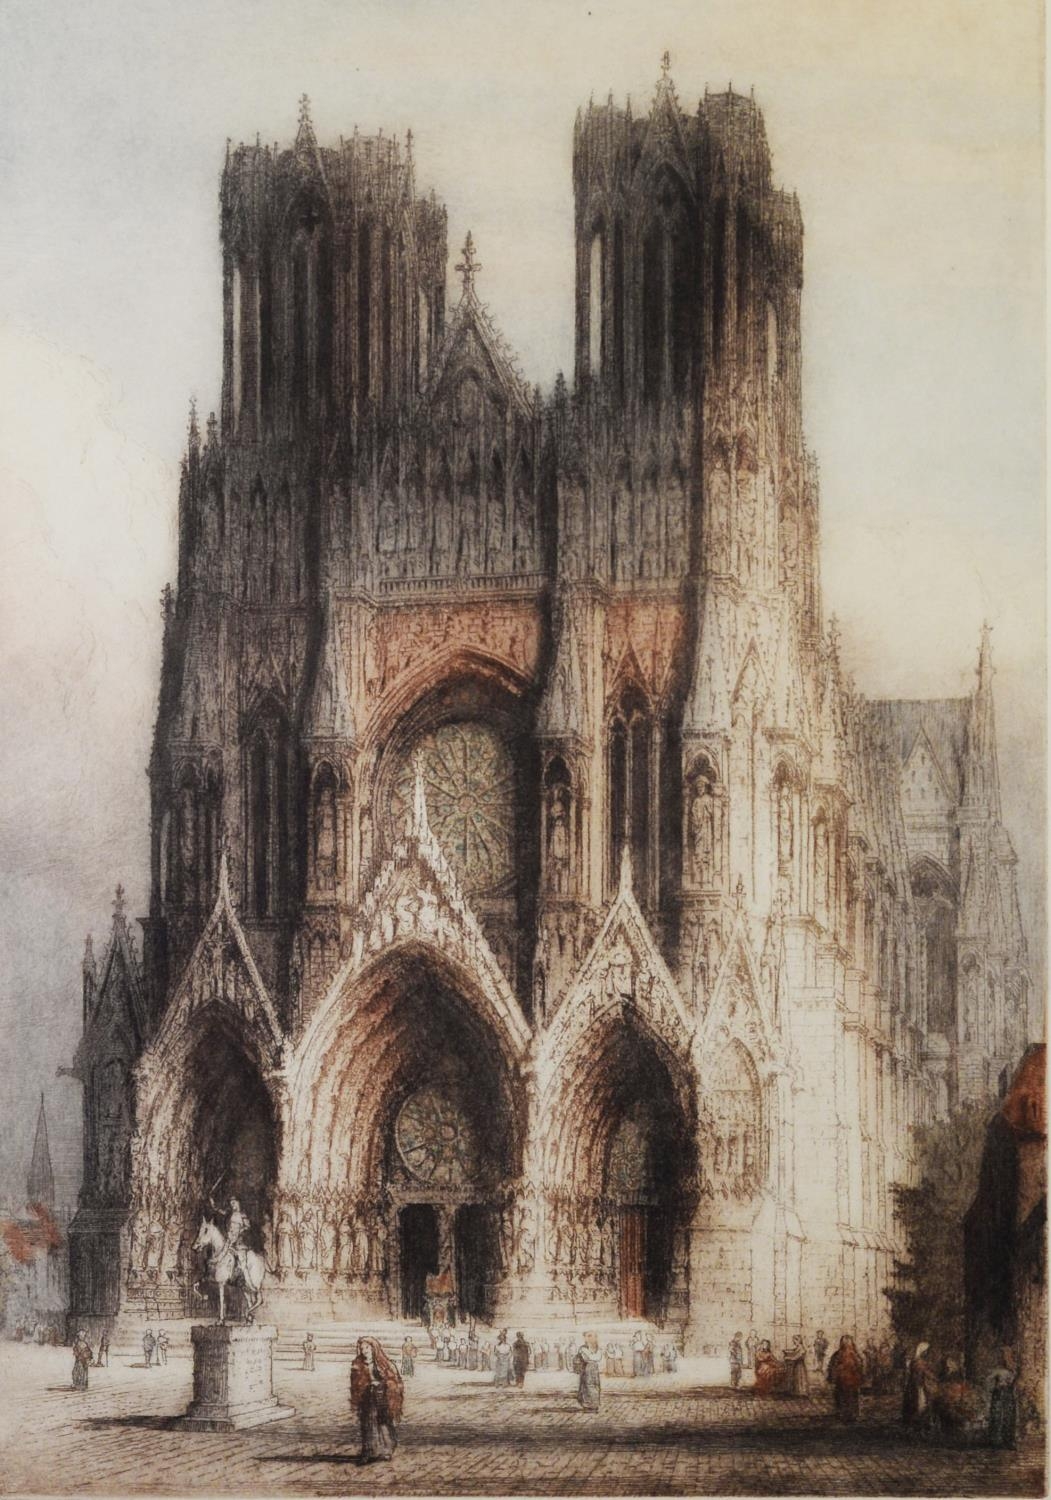 JAMES ALPHEGE BREWER (act. c. 1909-1938) ARTIST SIGNED HAND TINTED ETCHING ‘Rheims Cathedral’